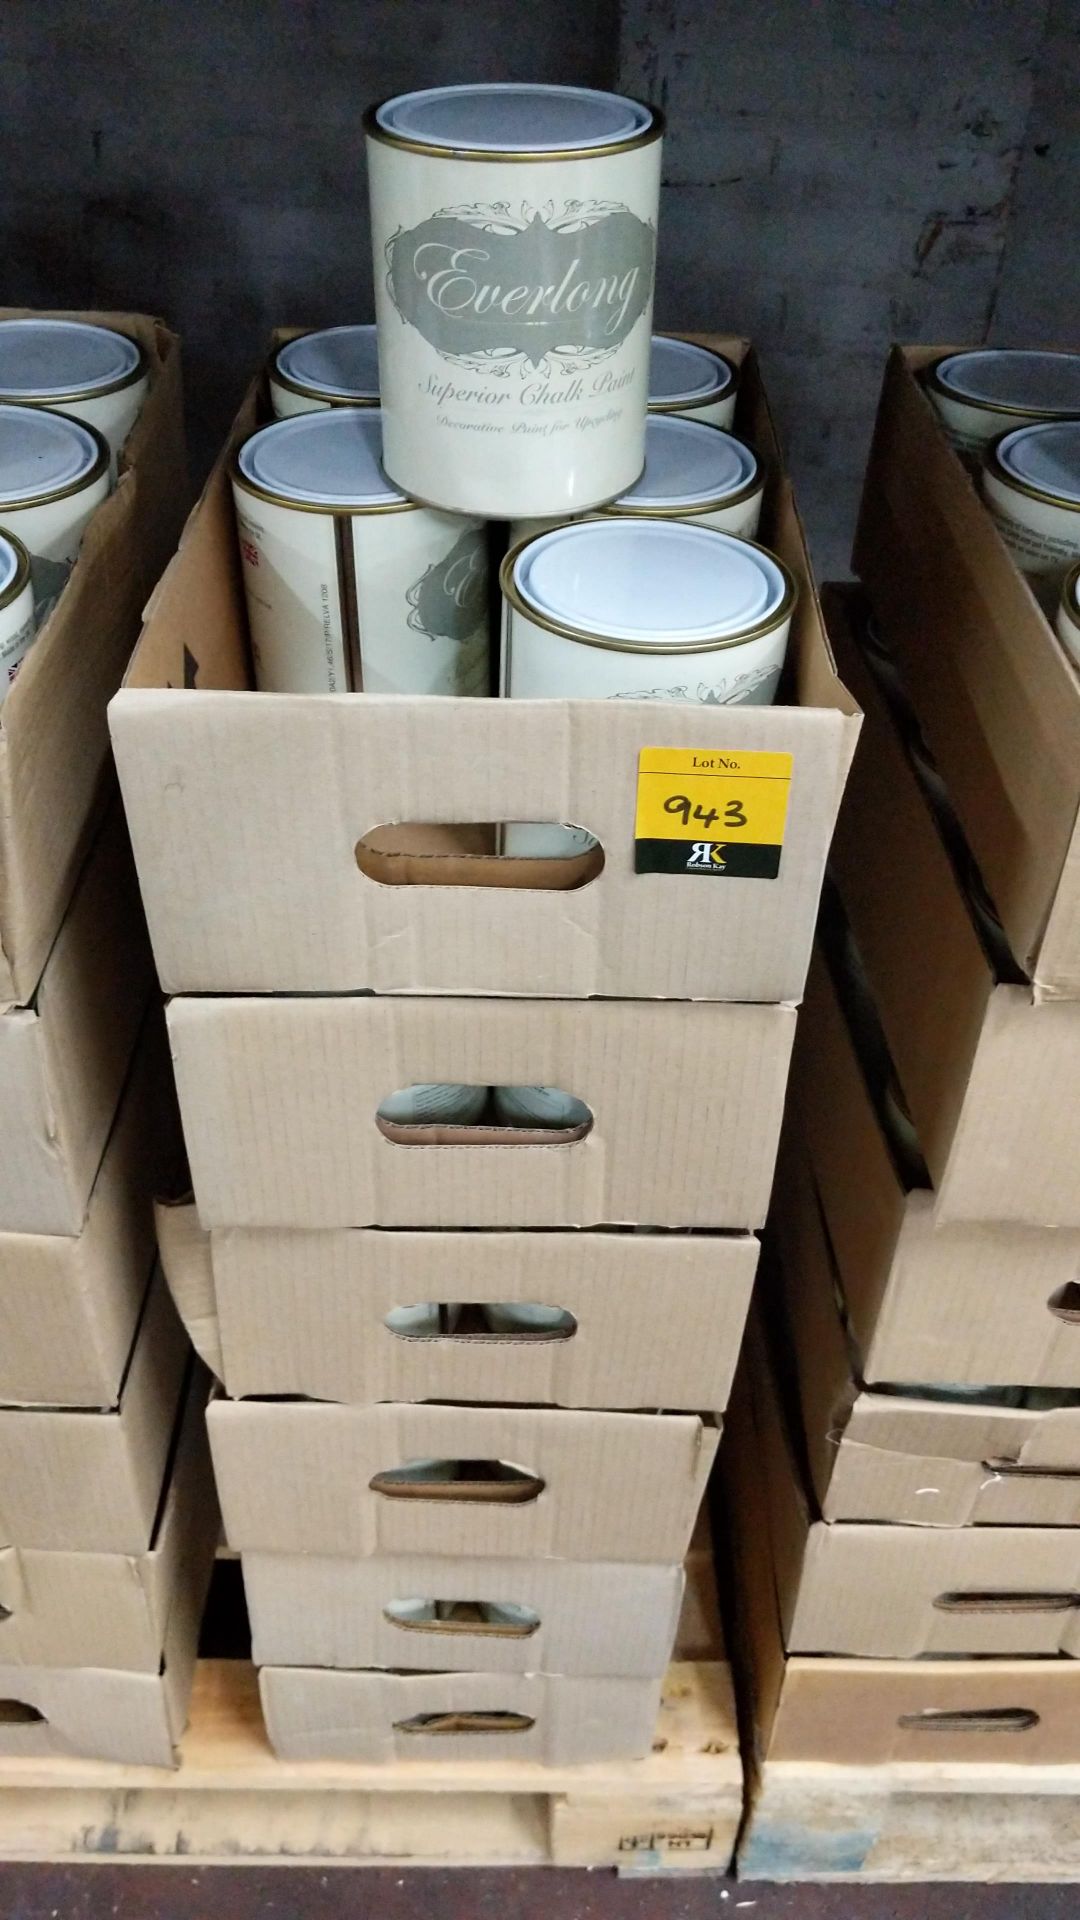 36 off 1 litre tins of Everlong branded superior chalk paint - colour Mandarin. NB the tins in